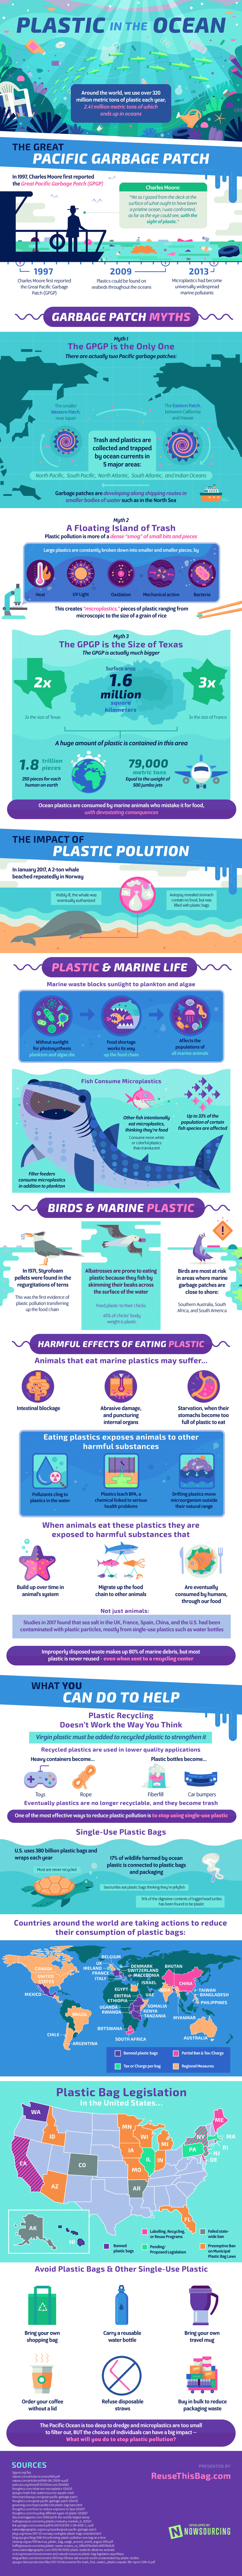 Plastics Waste in Our Oceans [INFOGRAPHIC]